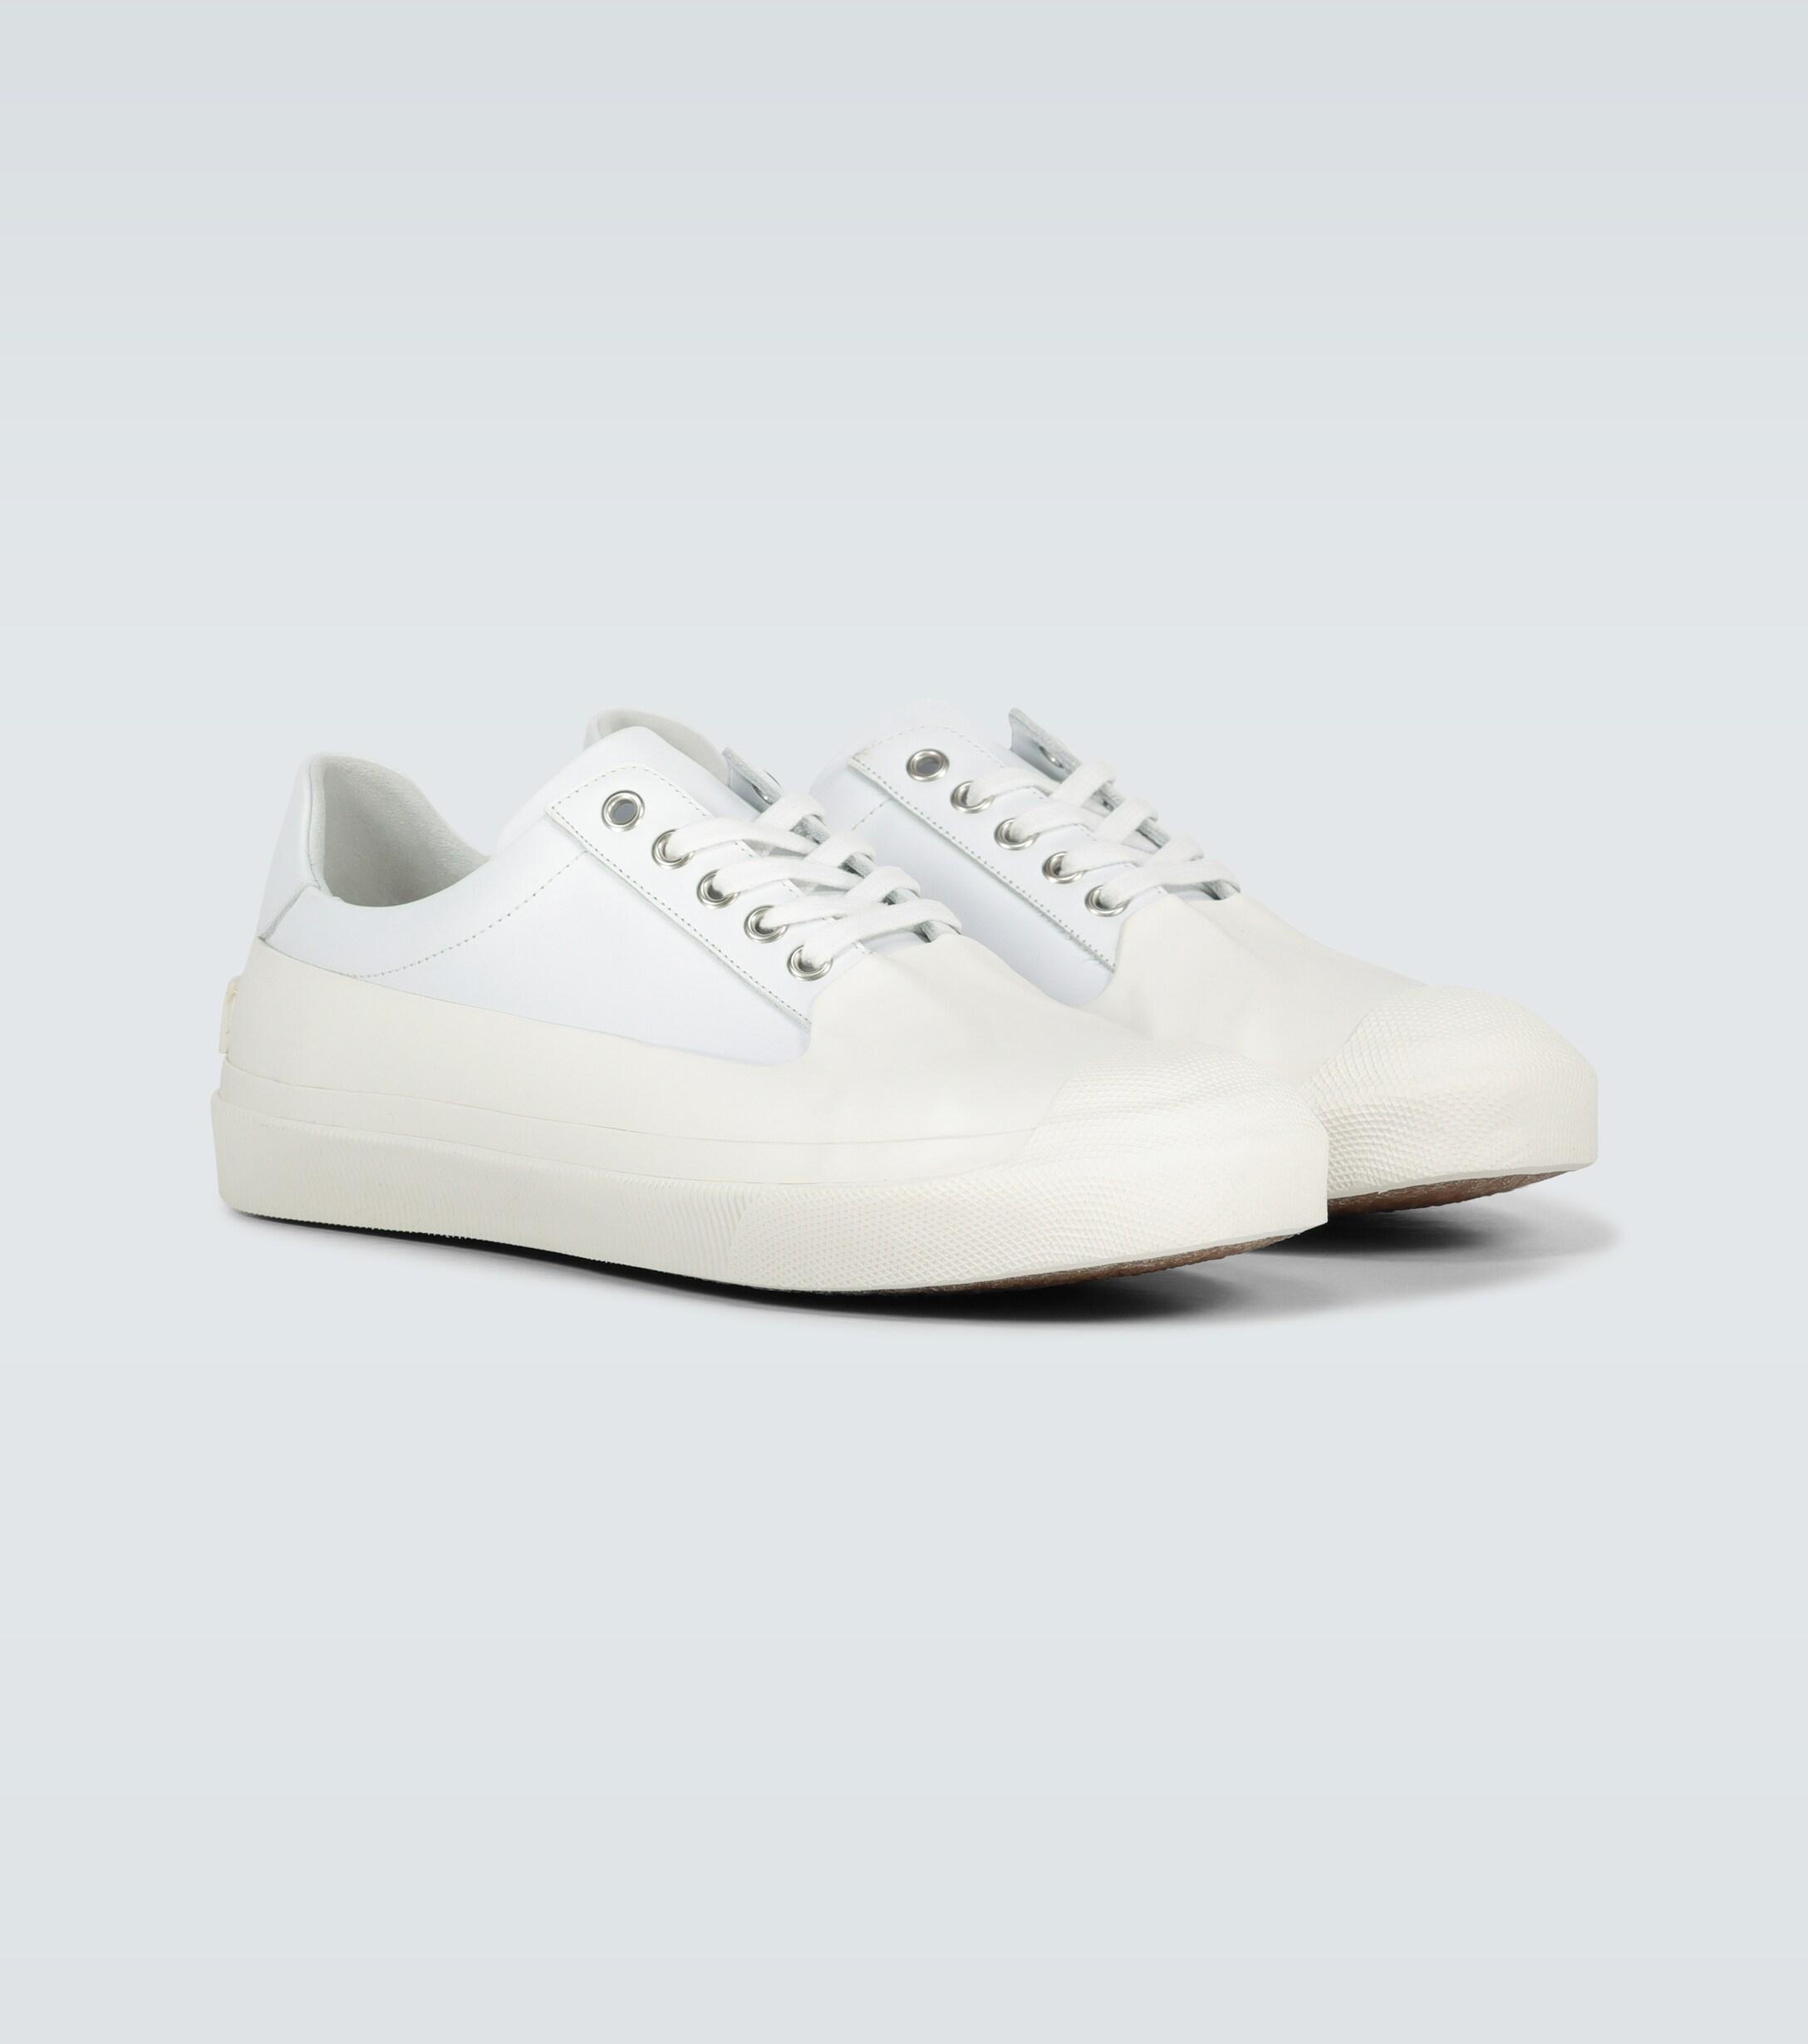 Dries Van Noten Leather And Rubber Toe Sneakers in White for Men - Lyst